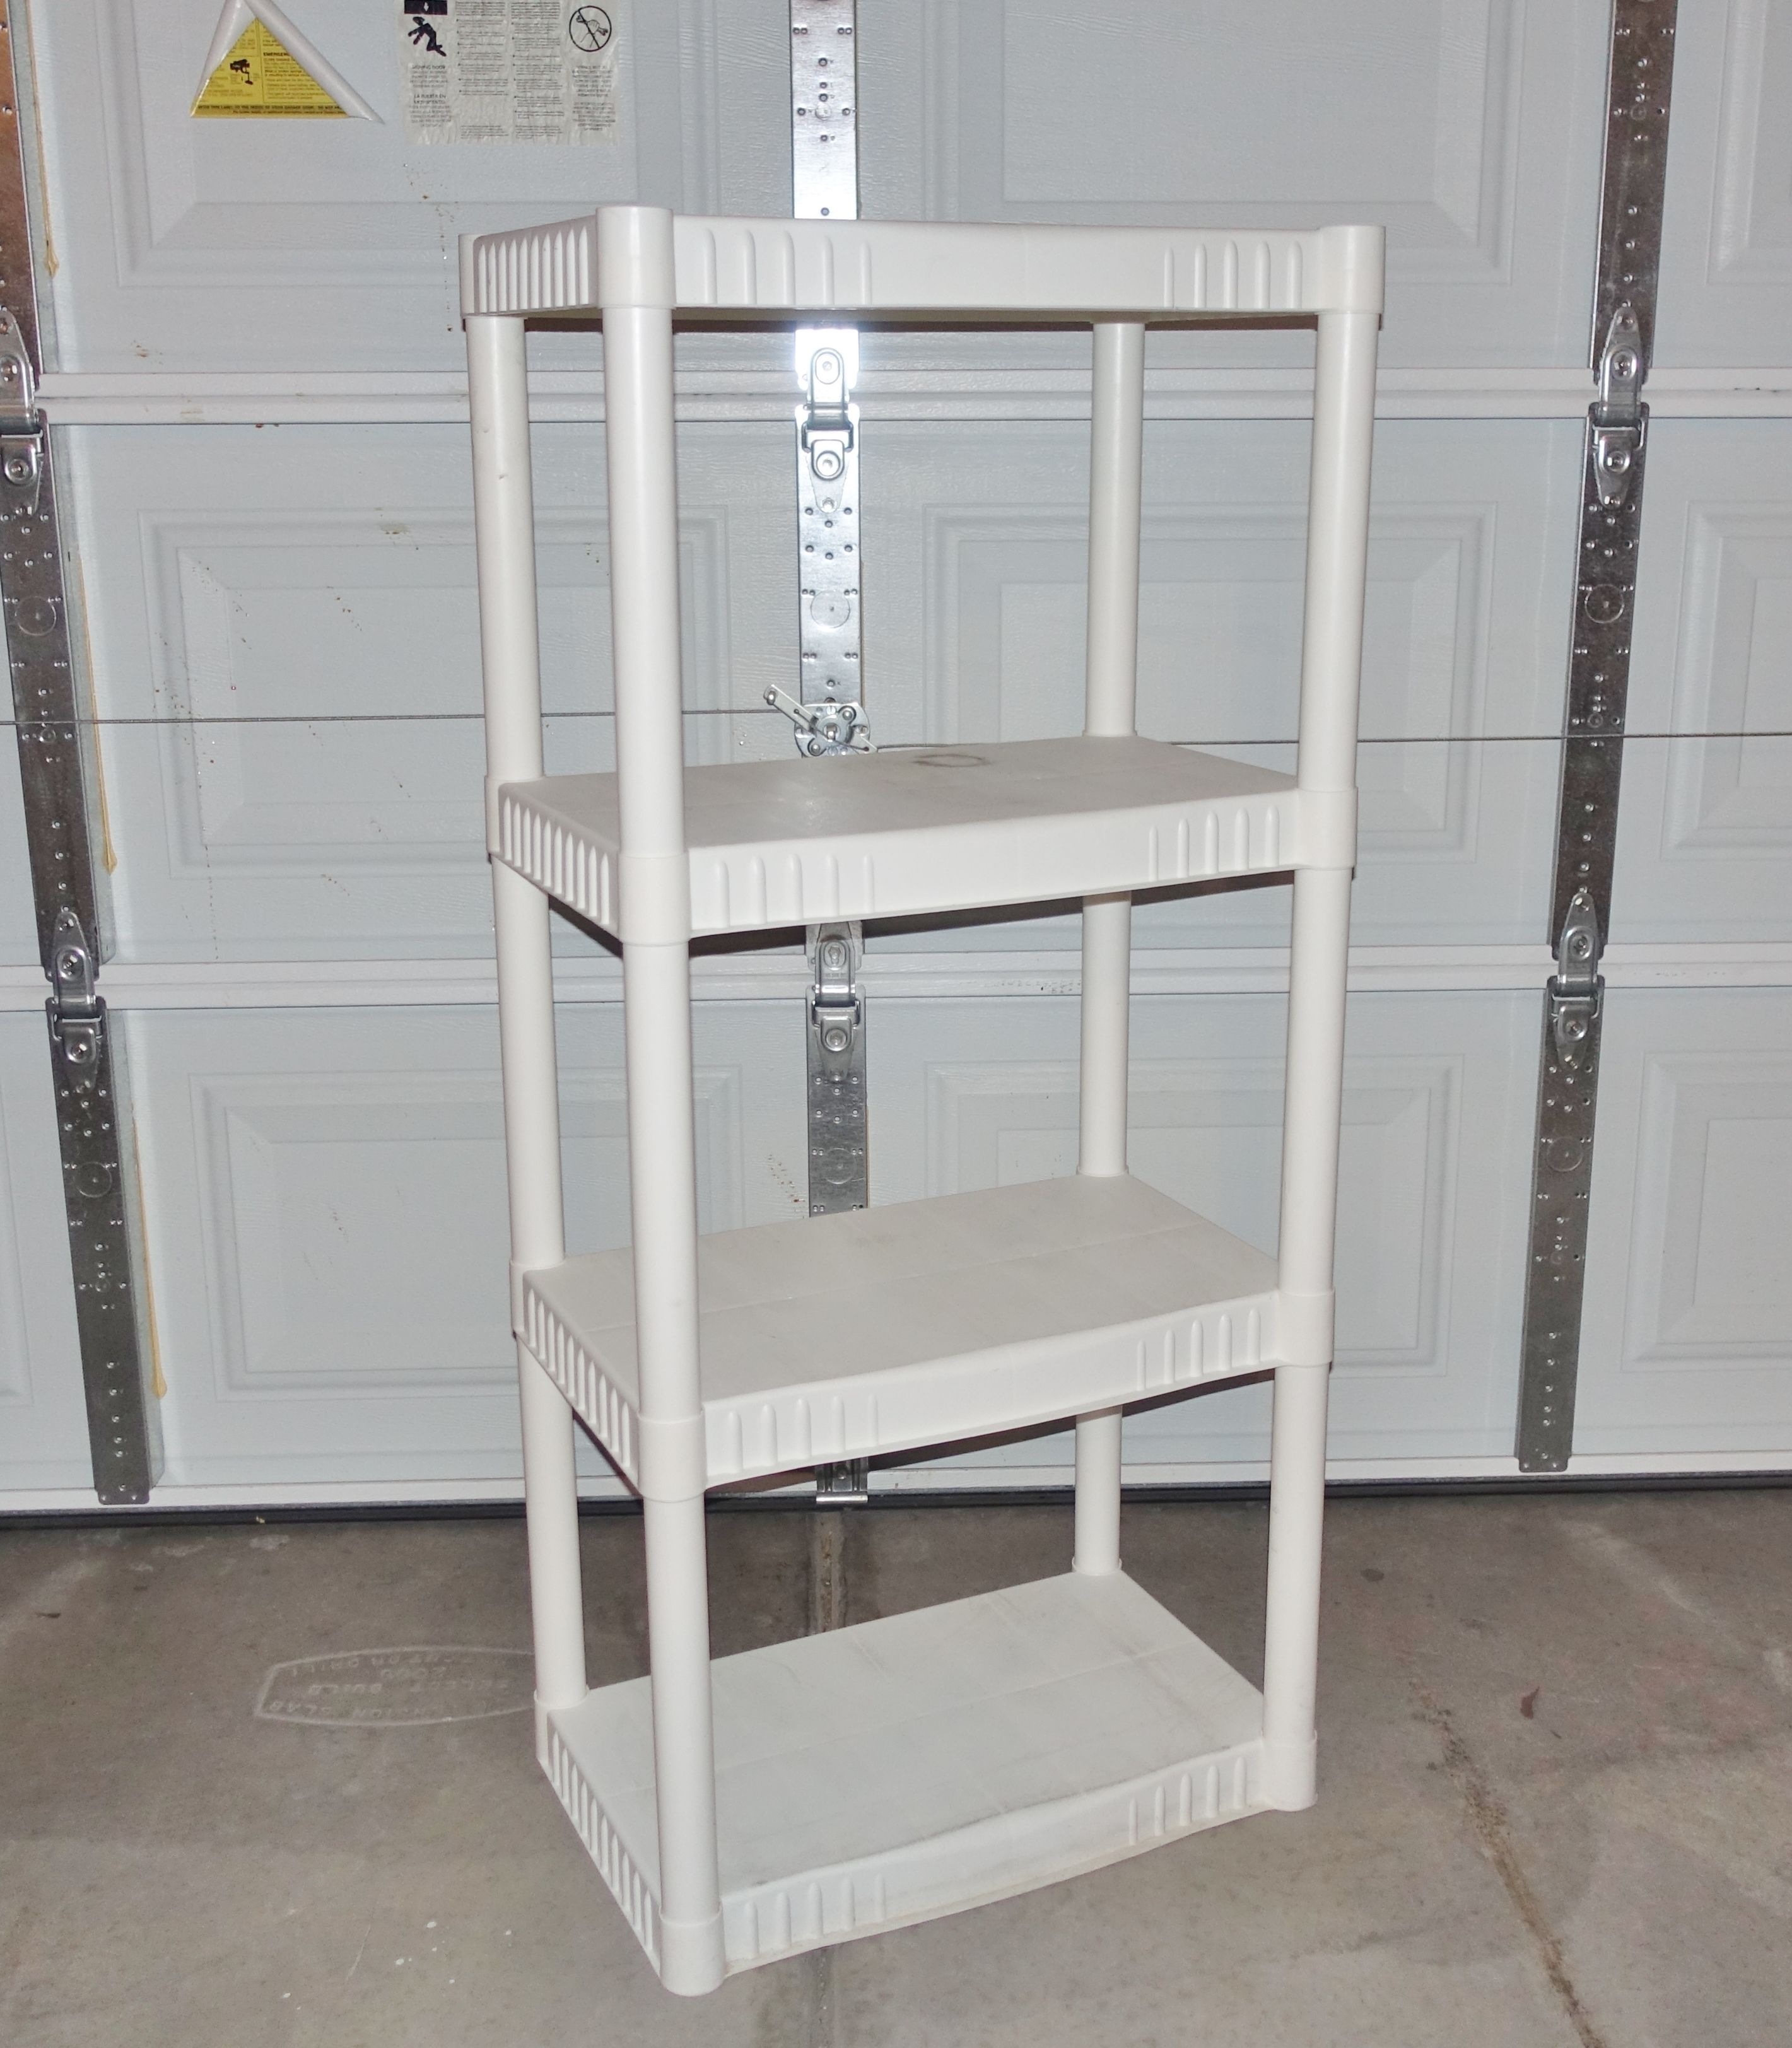 (FREE DELIVERY) used white garage storage shelves (4 feet tall)